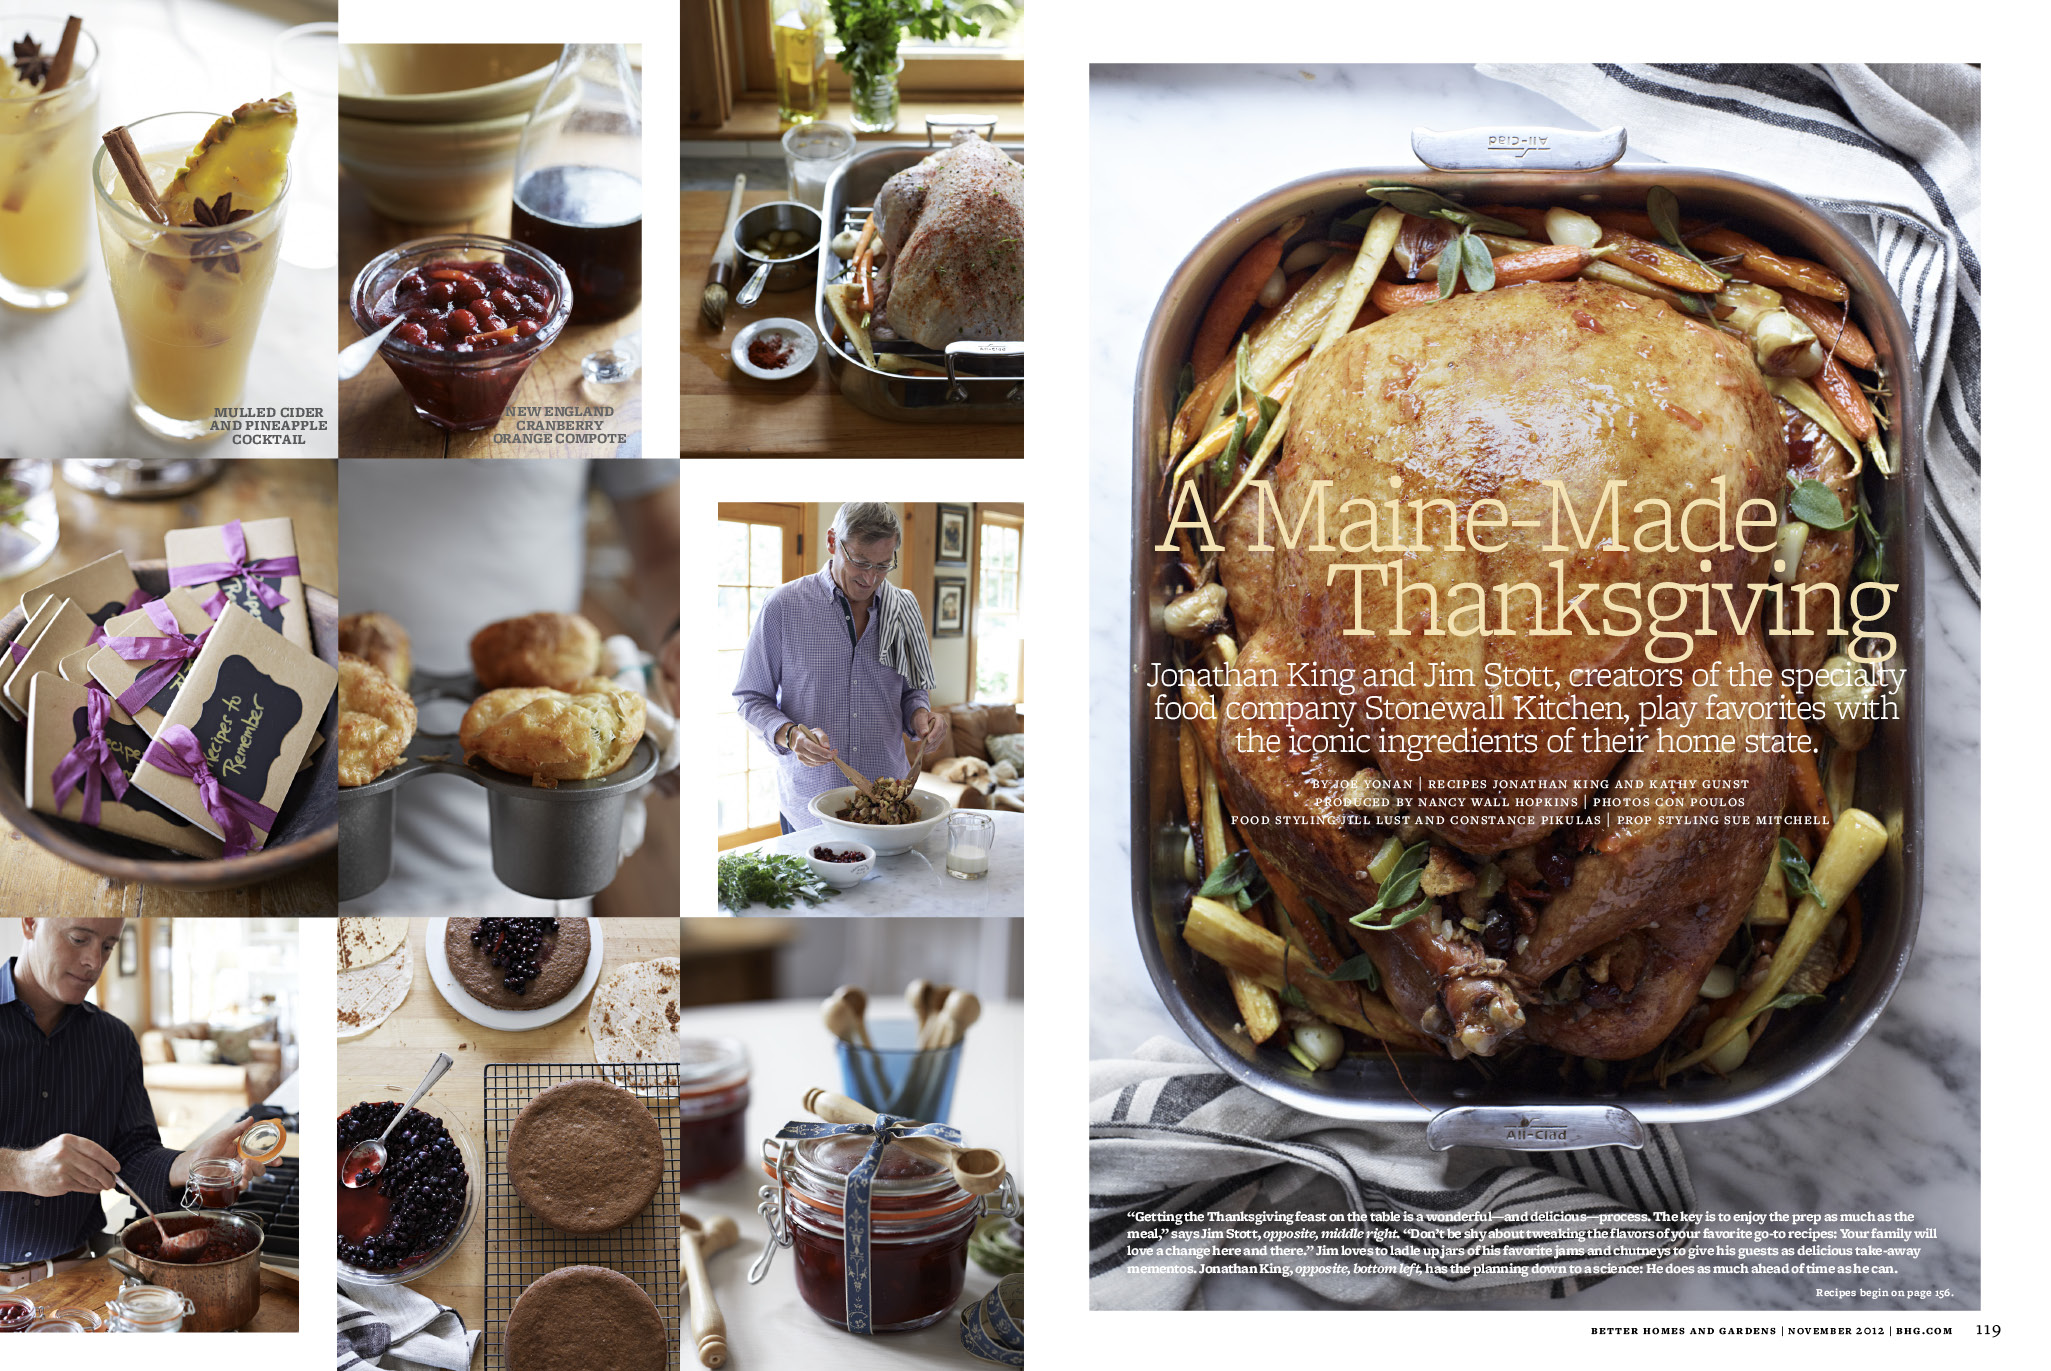 <strong>Maine-Made Thanksgiving, Better Homes & Gardens Magazine</strong><br />Words: Joe Yonan | Recipes: Jonathan King & Kathy Gunst | Photos: Con Poulos | Food Styling: Jill Lust & Contance Pikulas | Prop Styling: Sue Mitchell